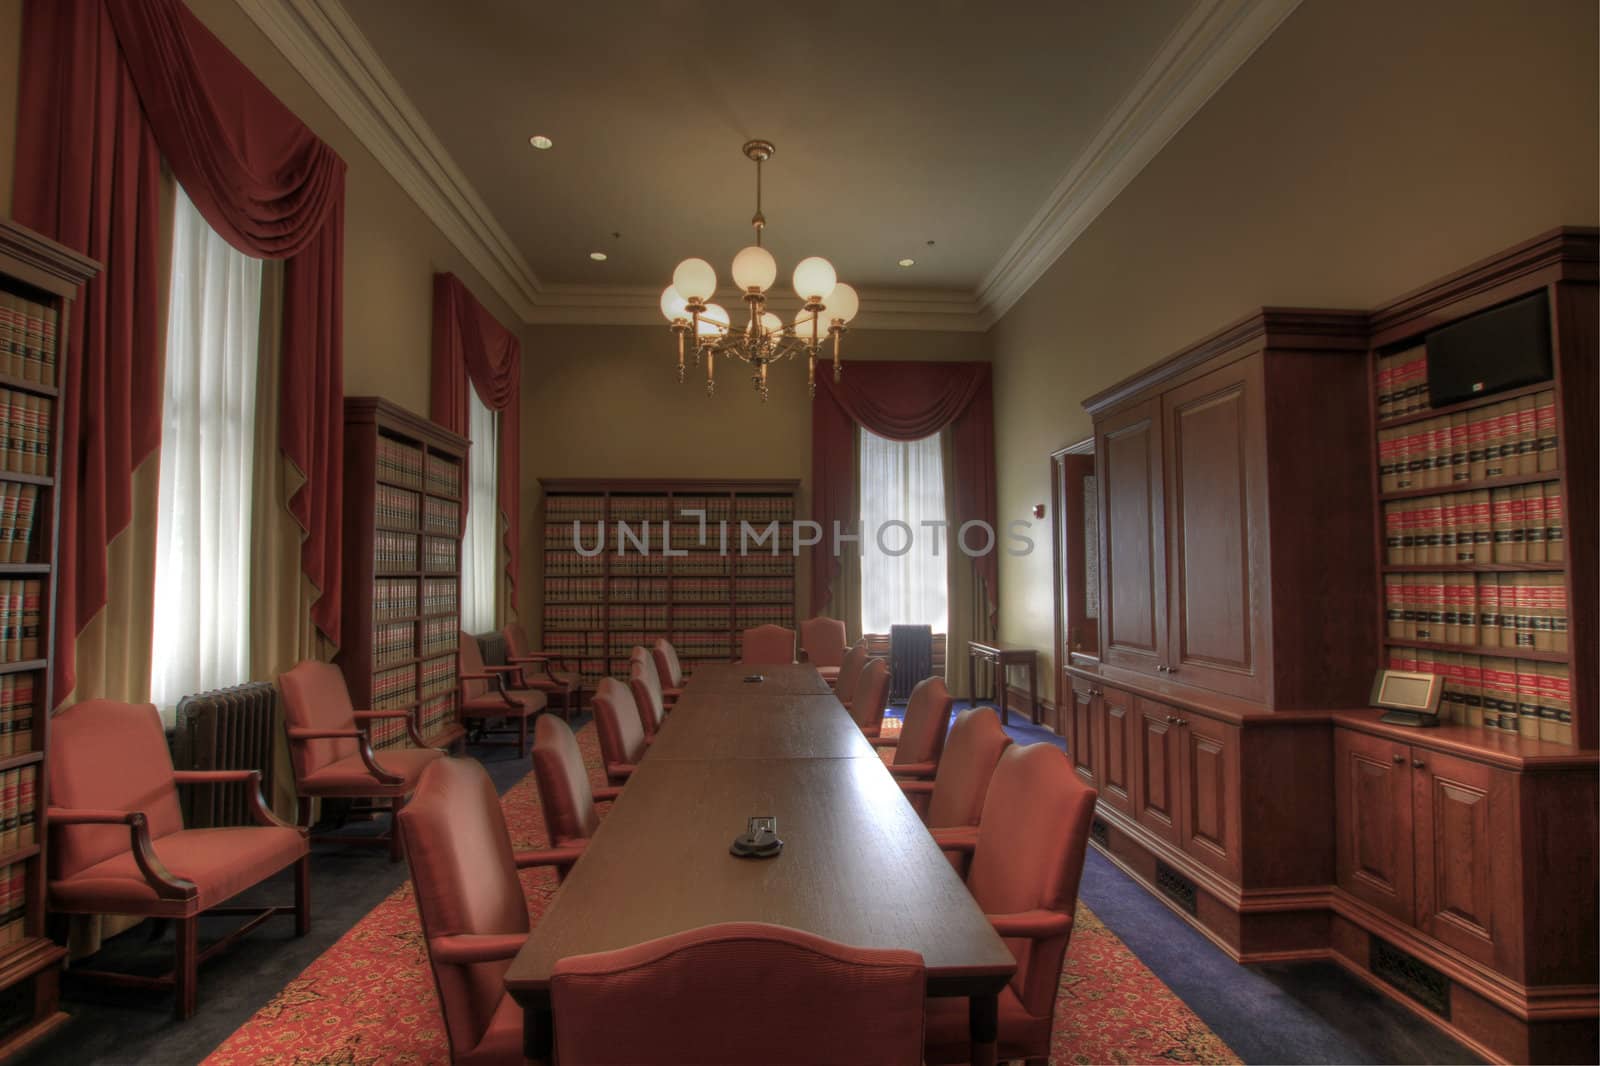 Law Library Meeting Room  by Davidgn